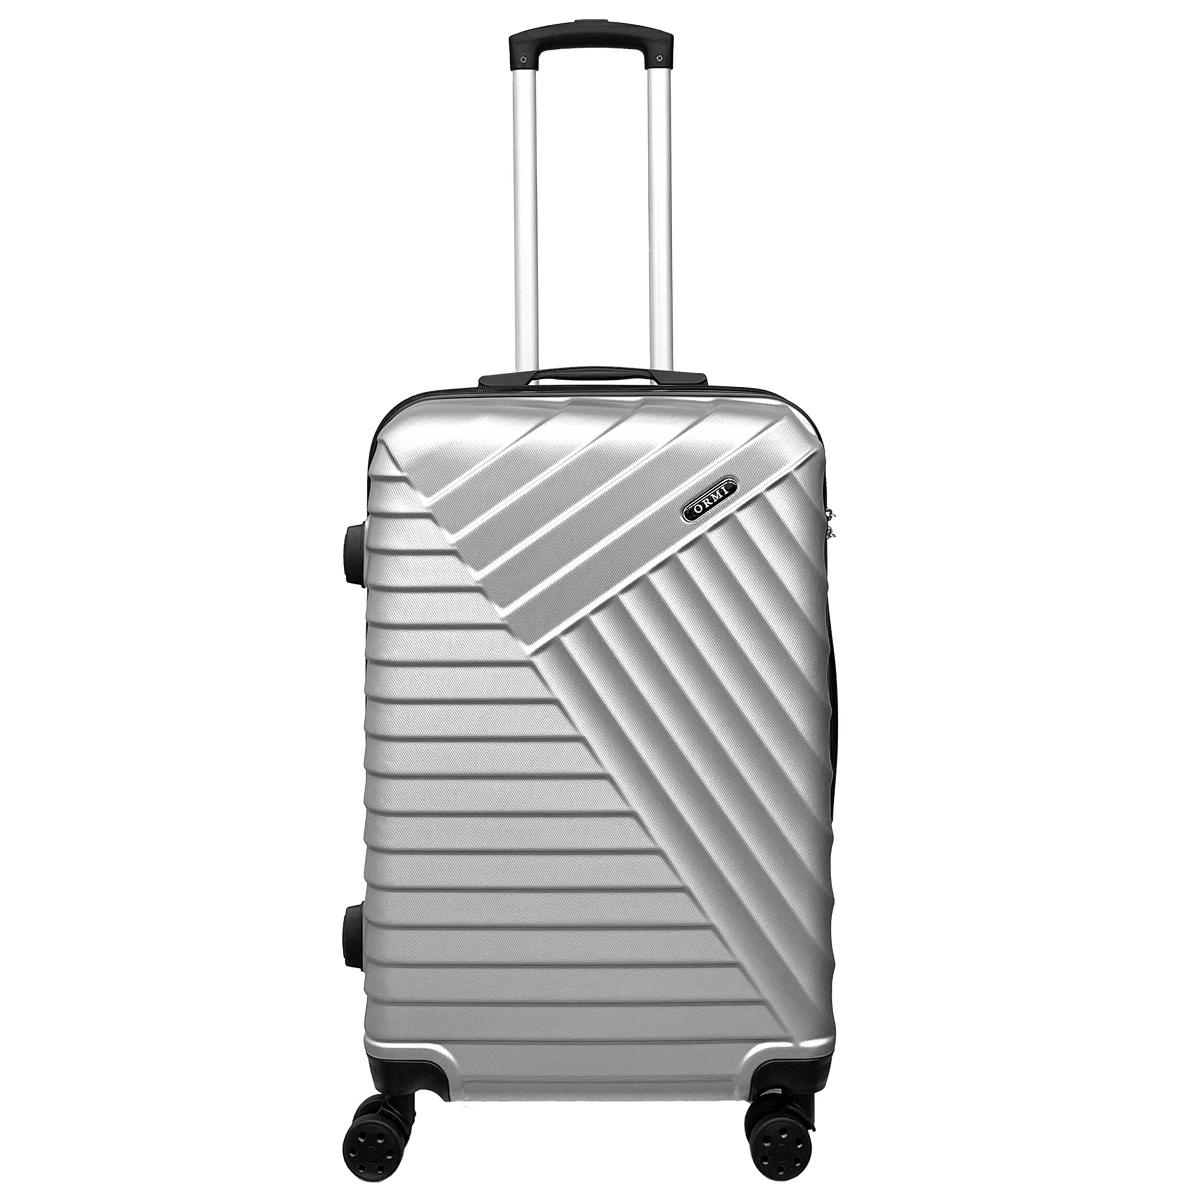 Medium-sized suitcase by STSHLine in sturdy ABS, dimensions 65x43x26 cm, with 4 double 360° wheels - Lightweight and durable